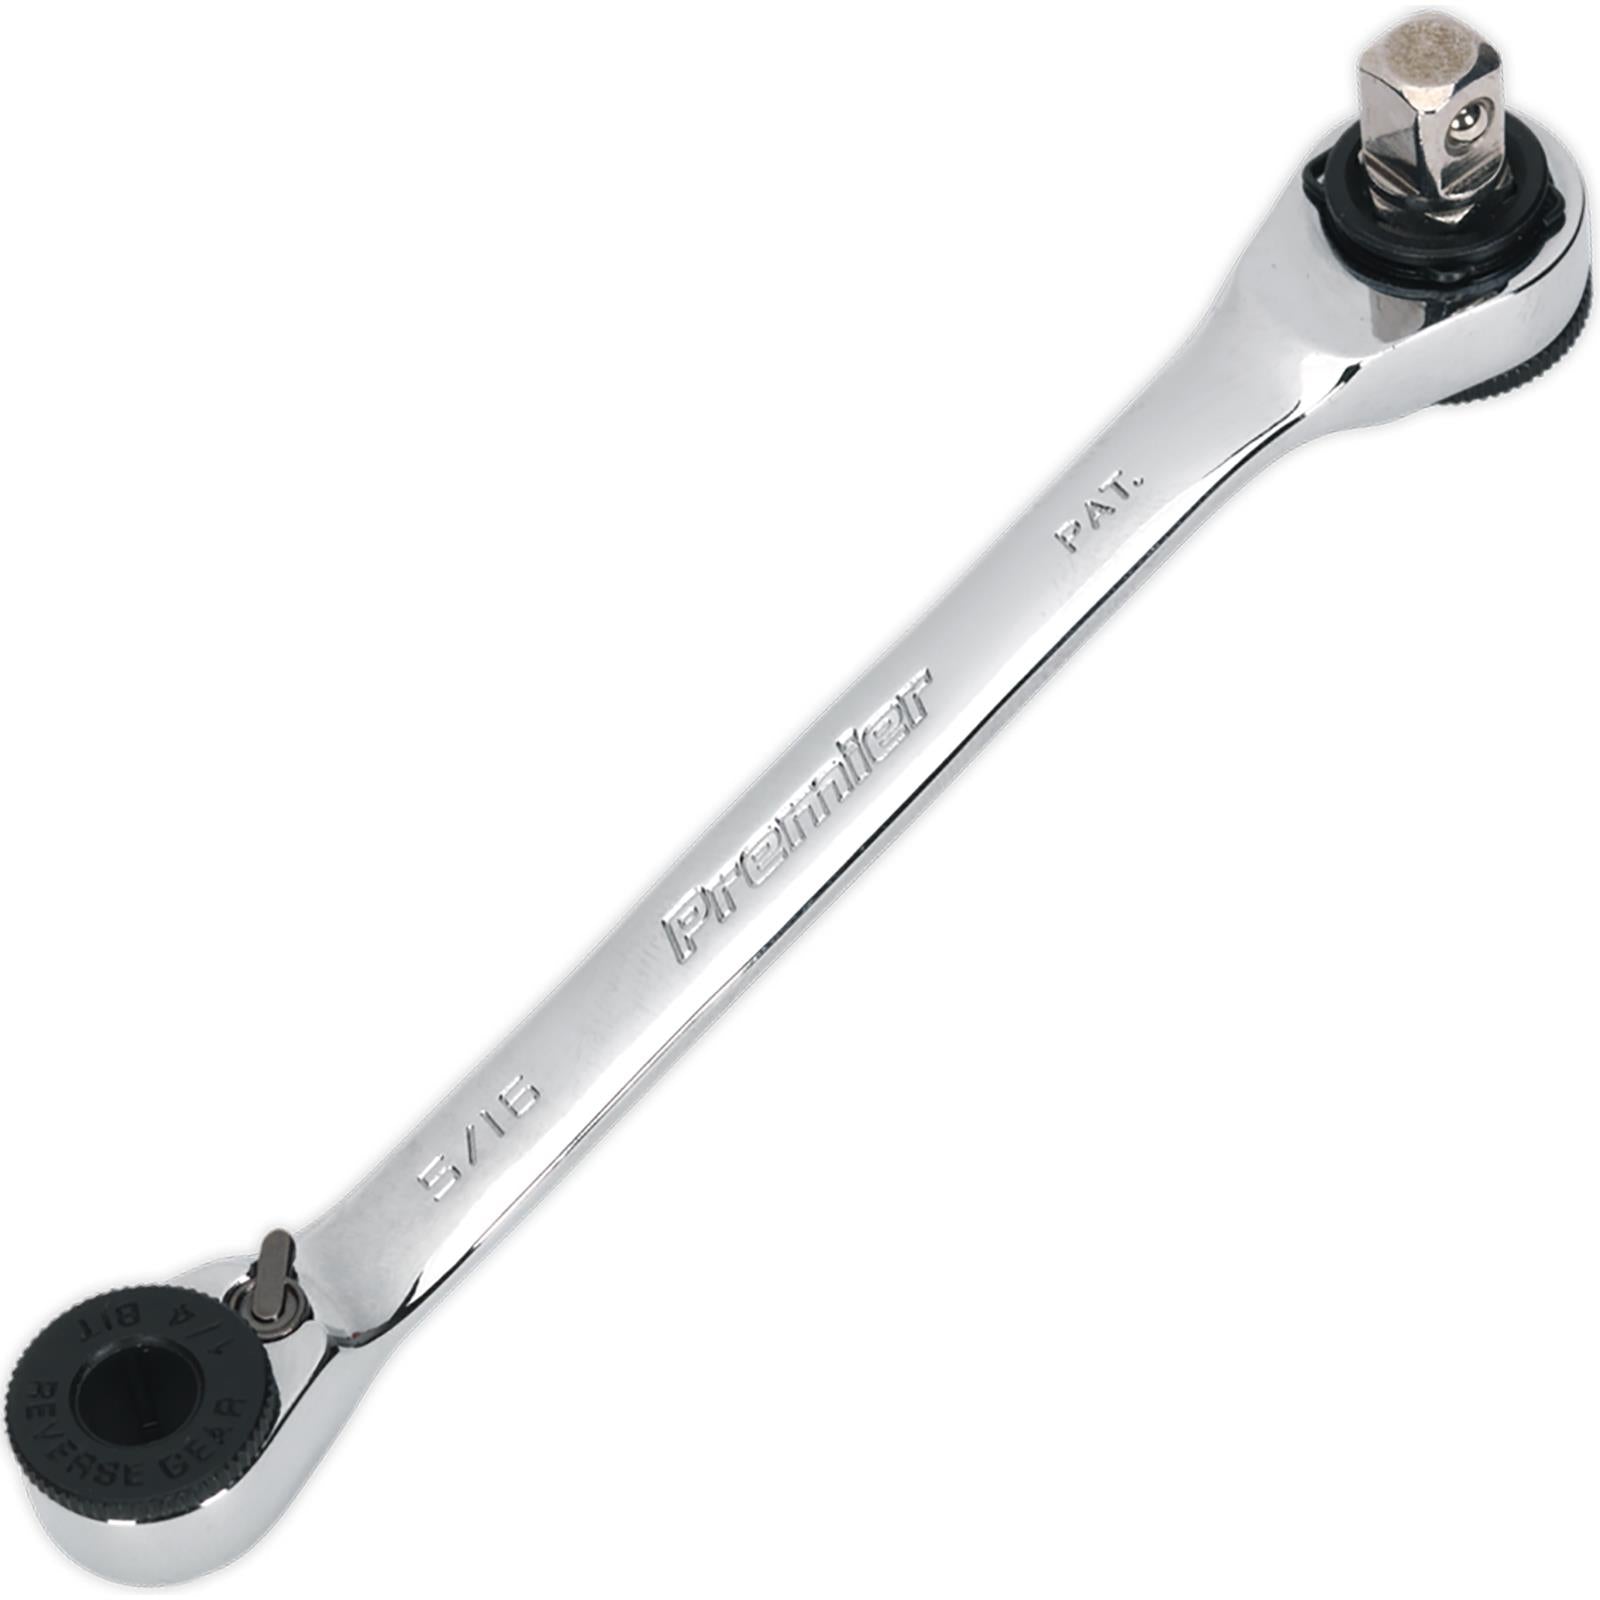 Sealey Premier 1/4" Hex x 5/16" Hex Reversible Ratchet Spanner with 1/4" Drive Adaptor